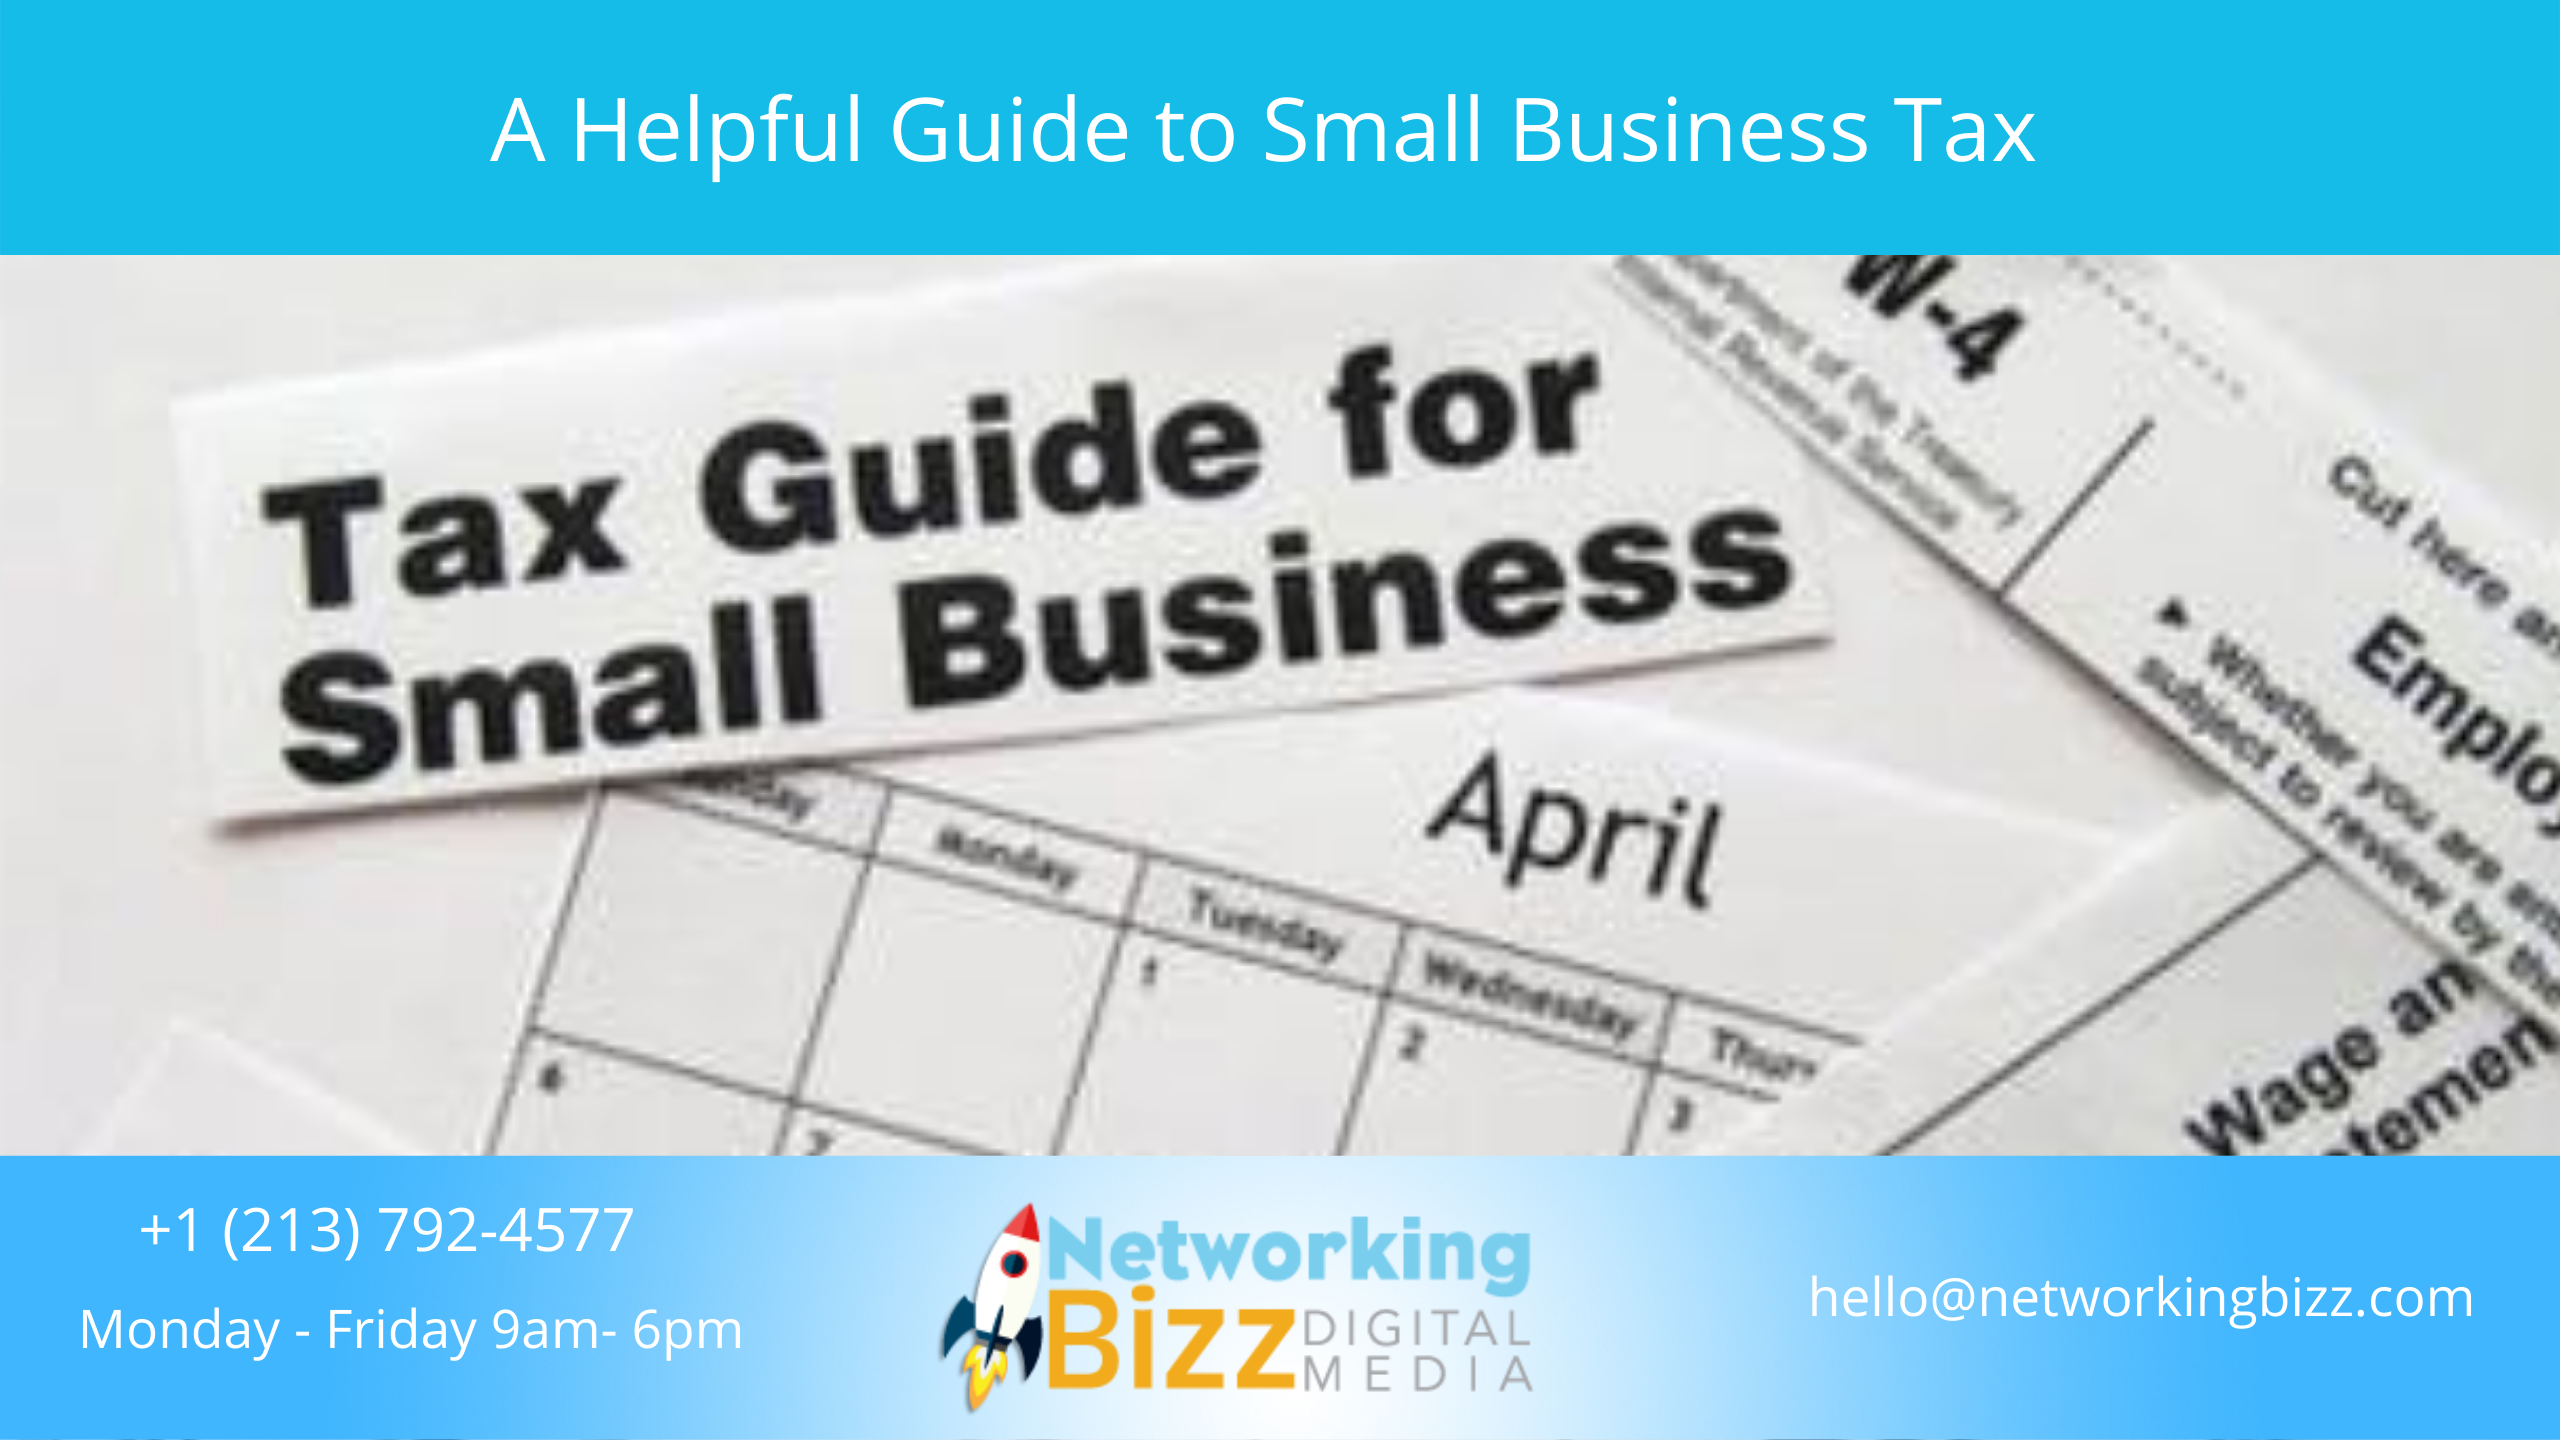 A Helpful Guide to Small Business Tax